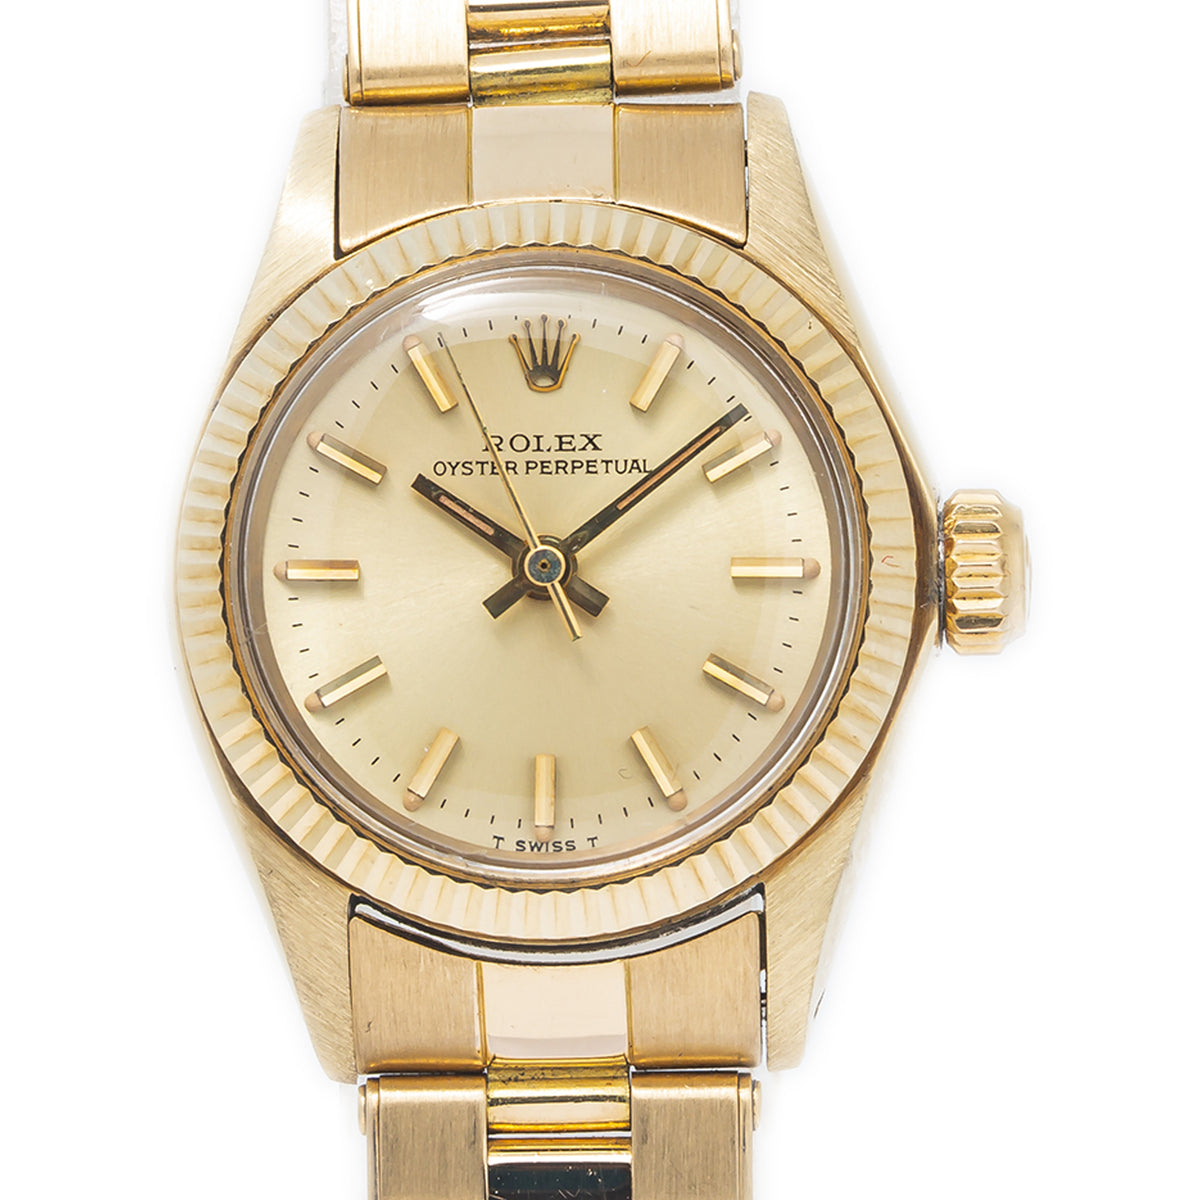 Rolex Oyster Perpetual 6719 14k Yellow Gold Oyster Champagne Dial Watch 25mm